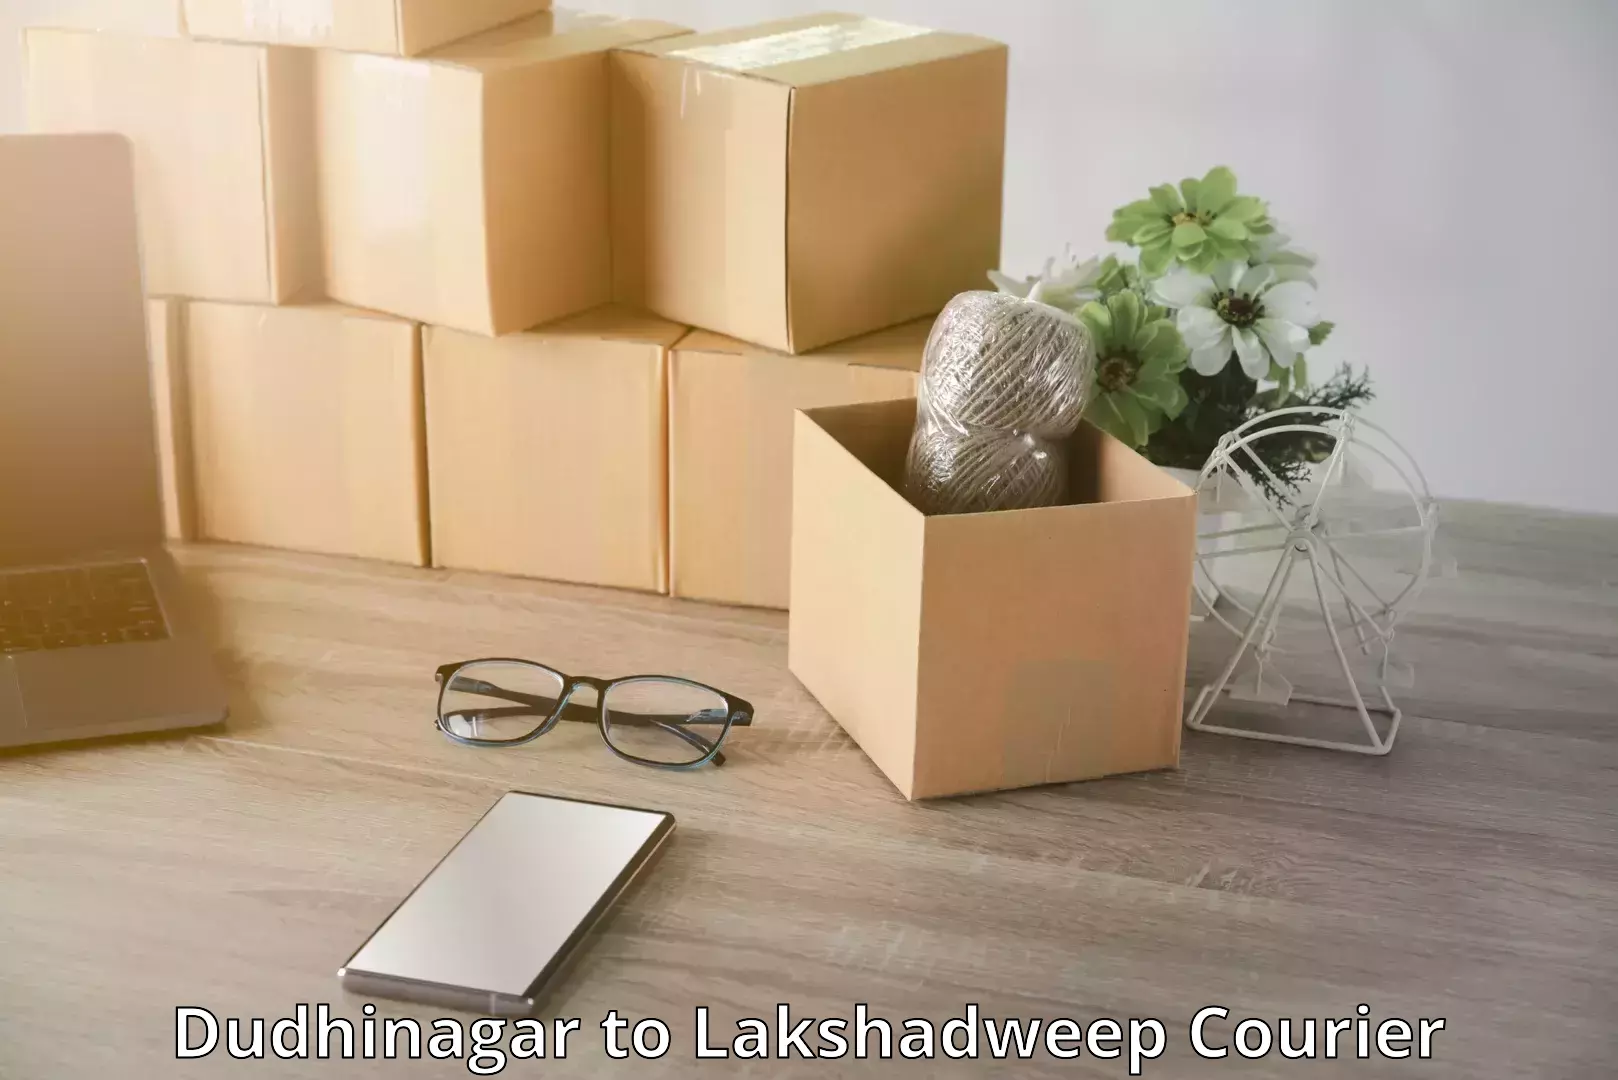 Luggage delivery system Dudhinagar to Lakshadweep